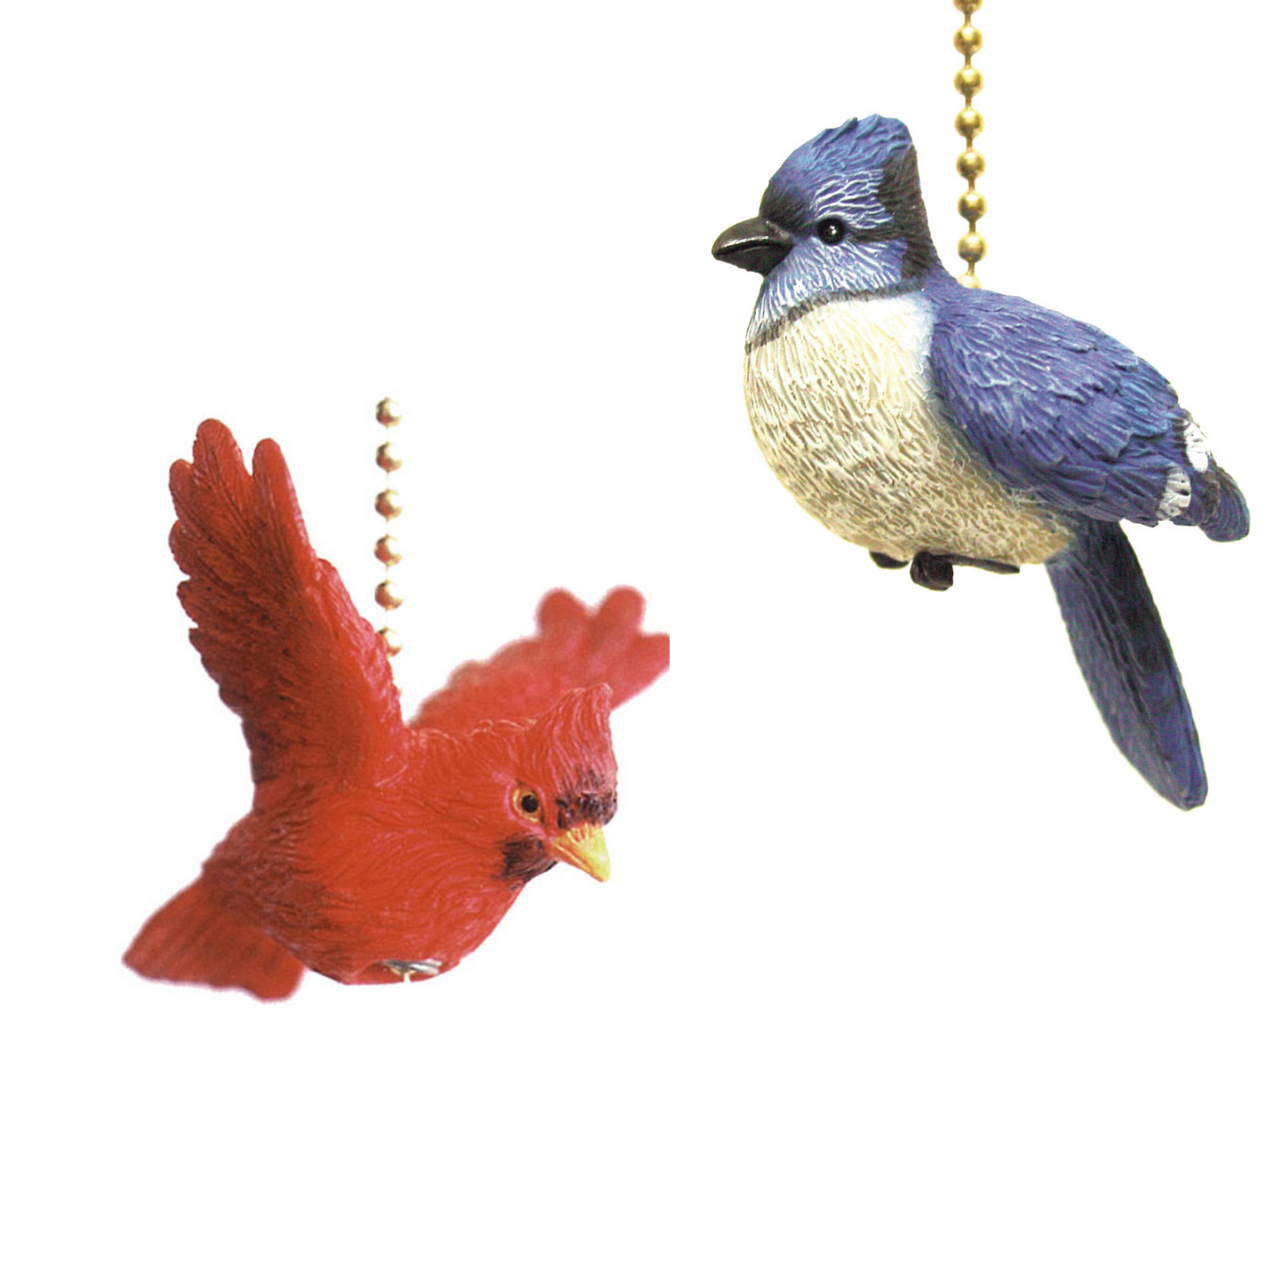 Red Cardinal and Blue Jay Backyard Birds Ceiling Fan or Light Pulls Set of  2 - Mary B Decorative Art